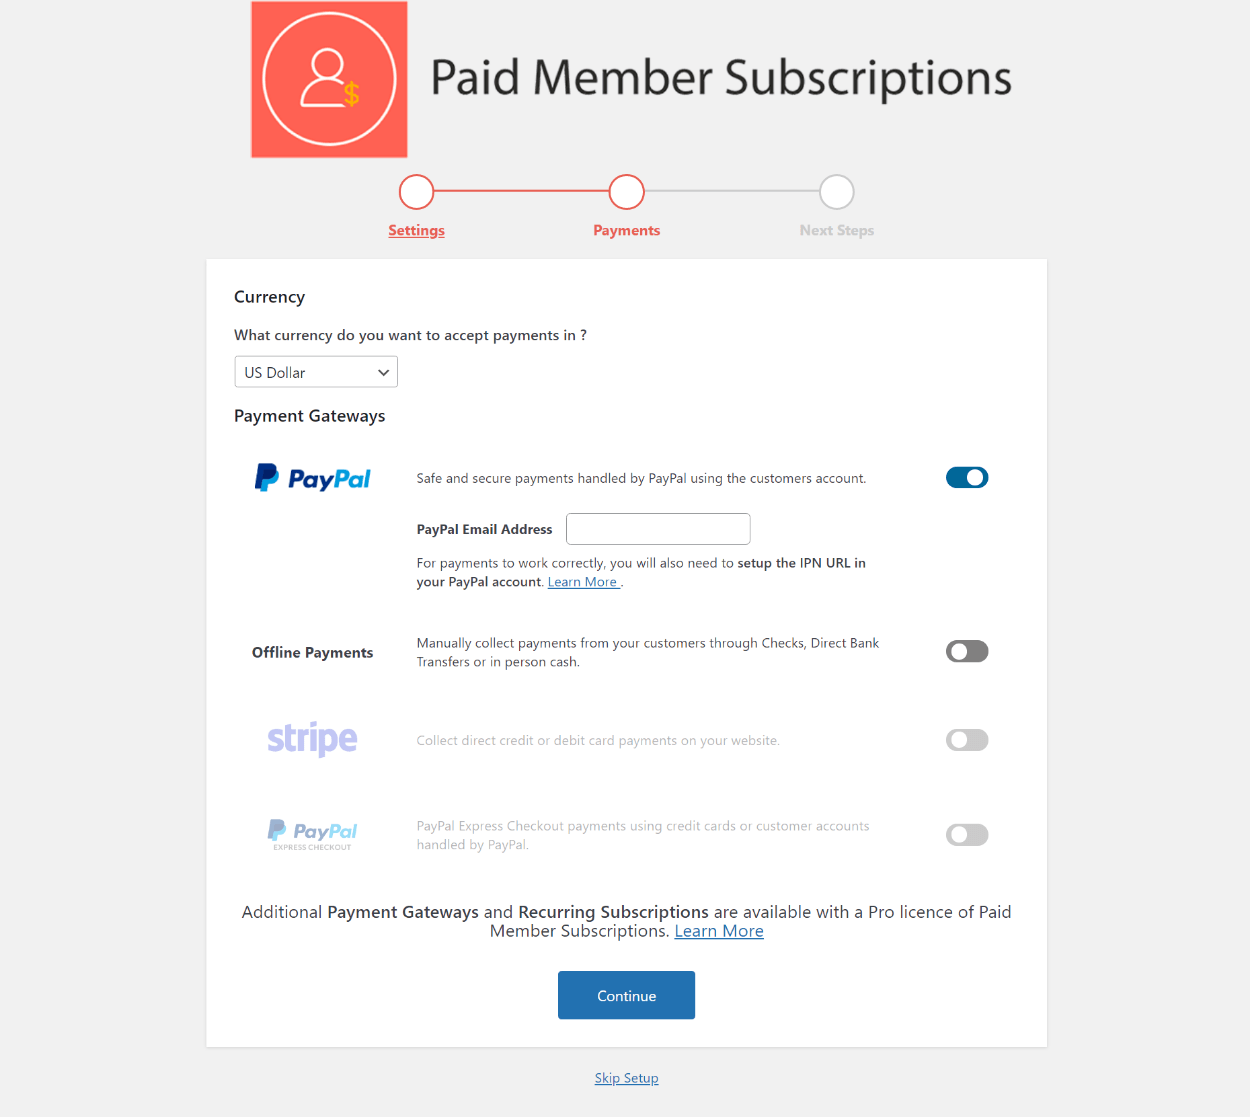 Paid Member Subscriptions payment gateways